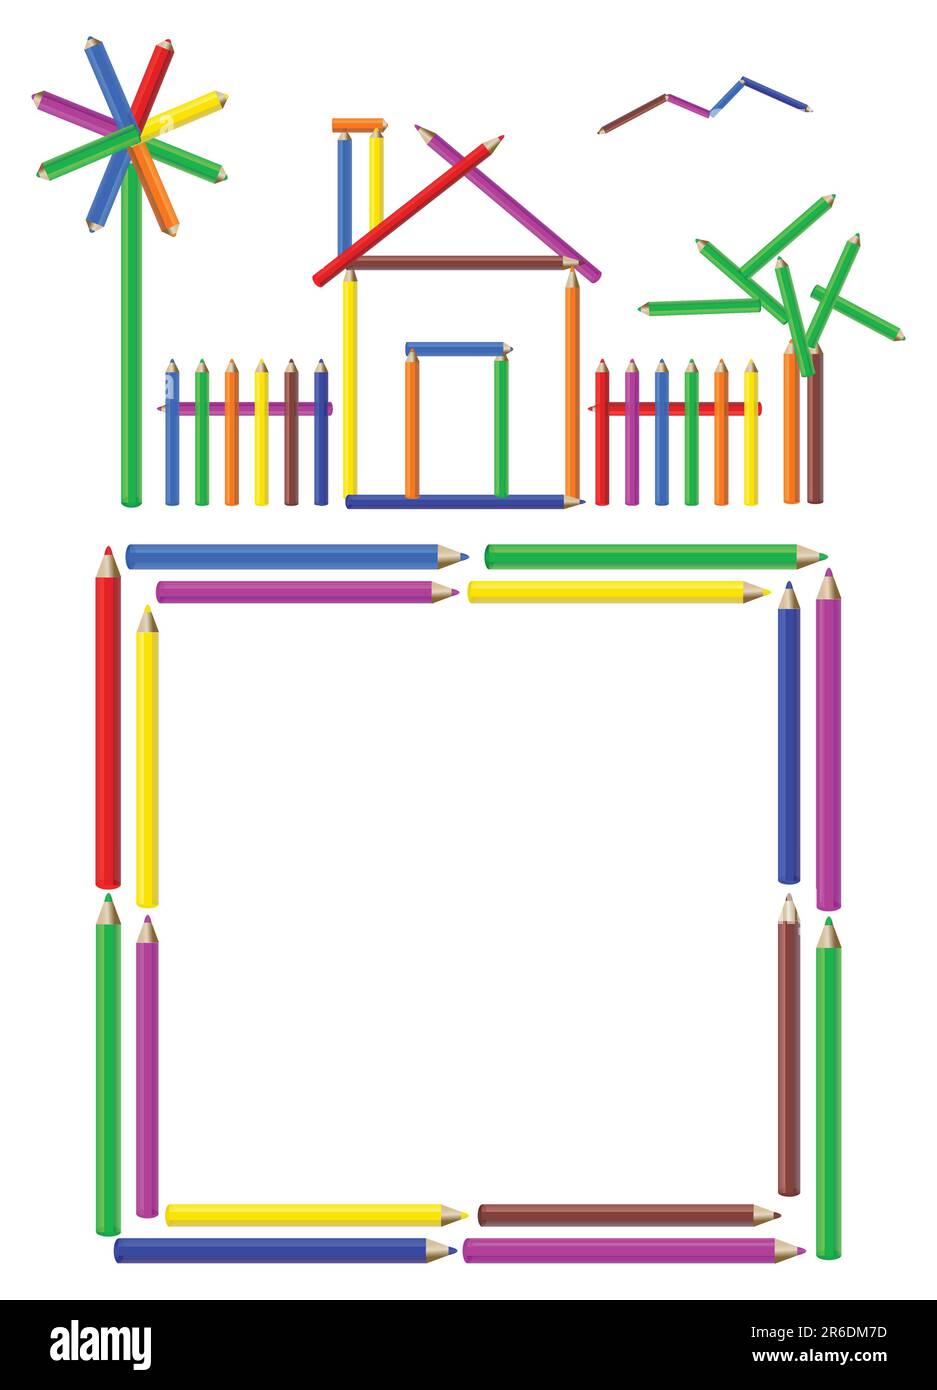 Picture of a house, garden and a frame made of color pencils Stock Vector